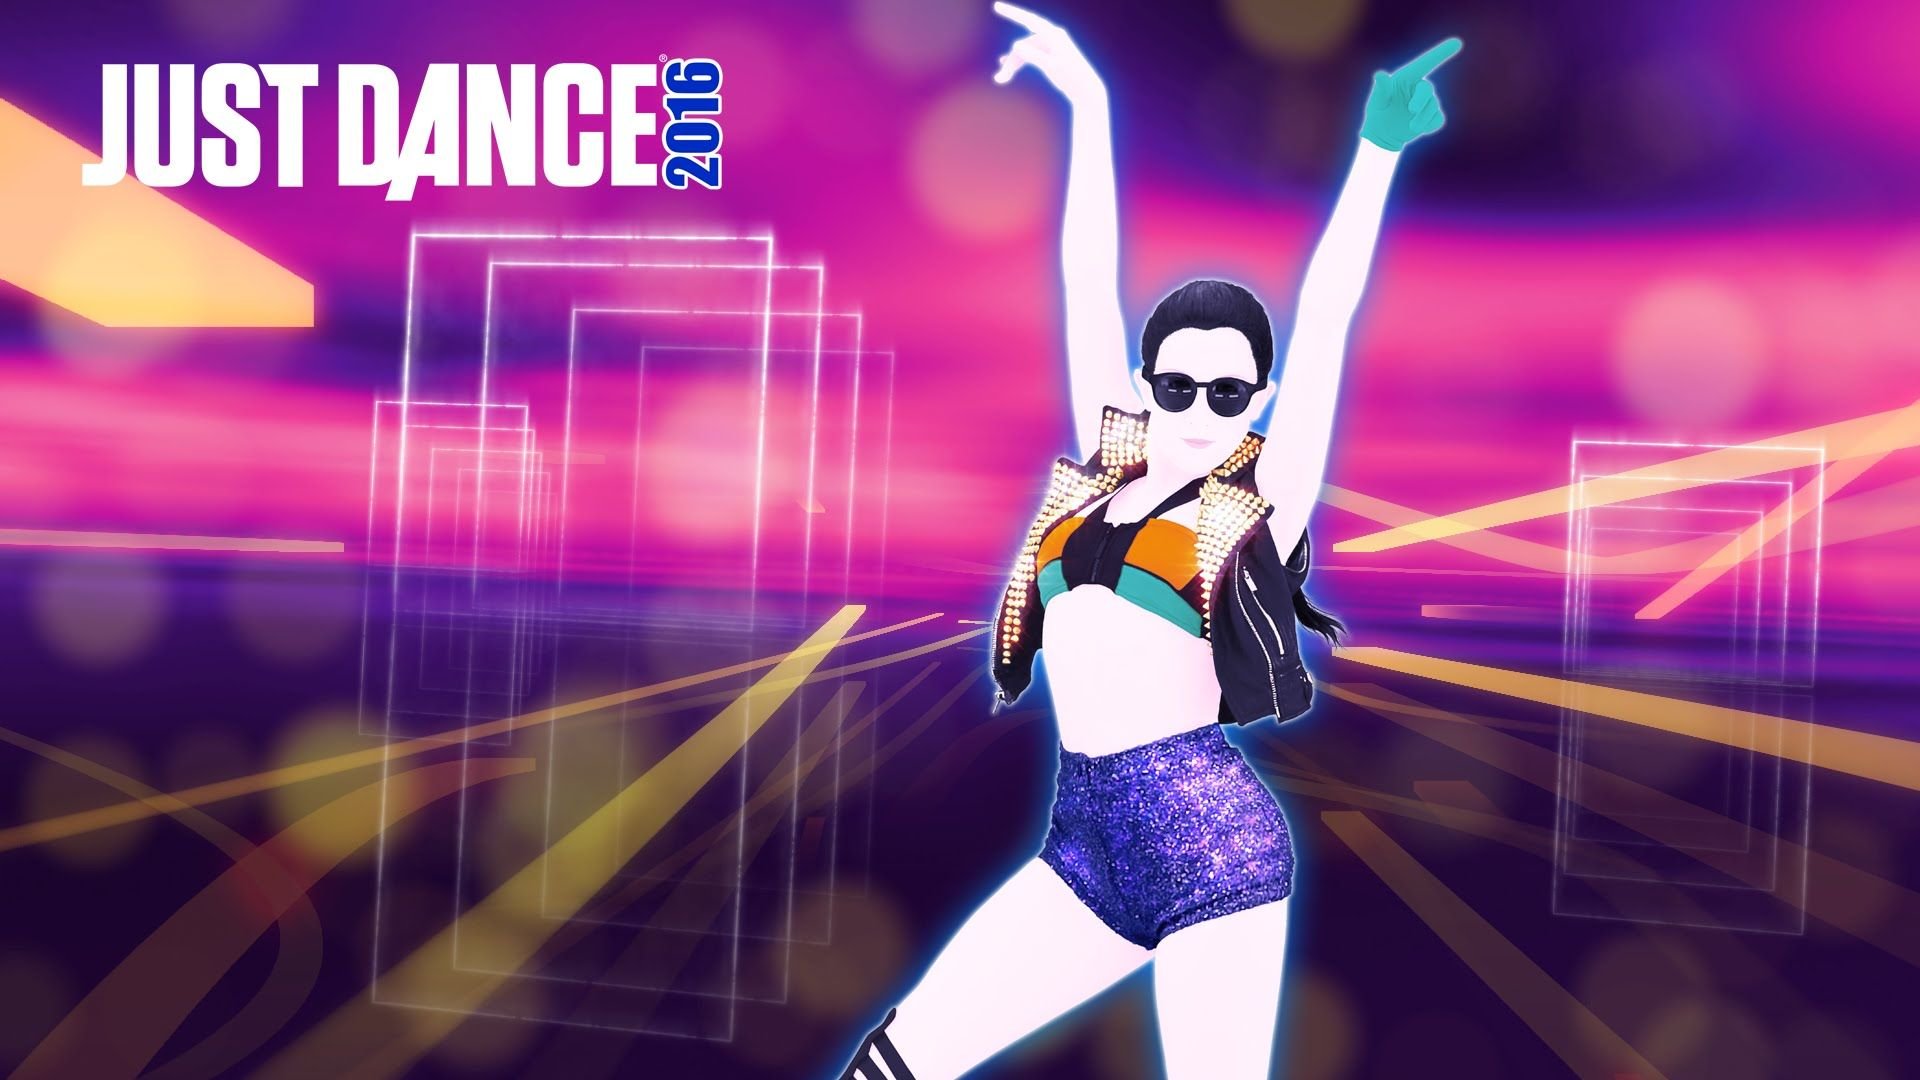 This is just a game. Танцевальная игра just Dance. Джаст дэнс танцы. Just Dance Колби одонис. Just Dance 2018 обложка.